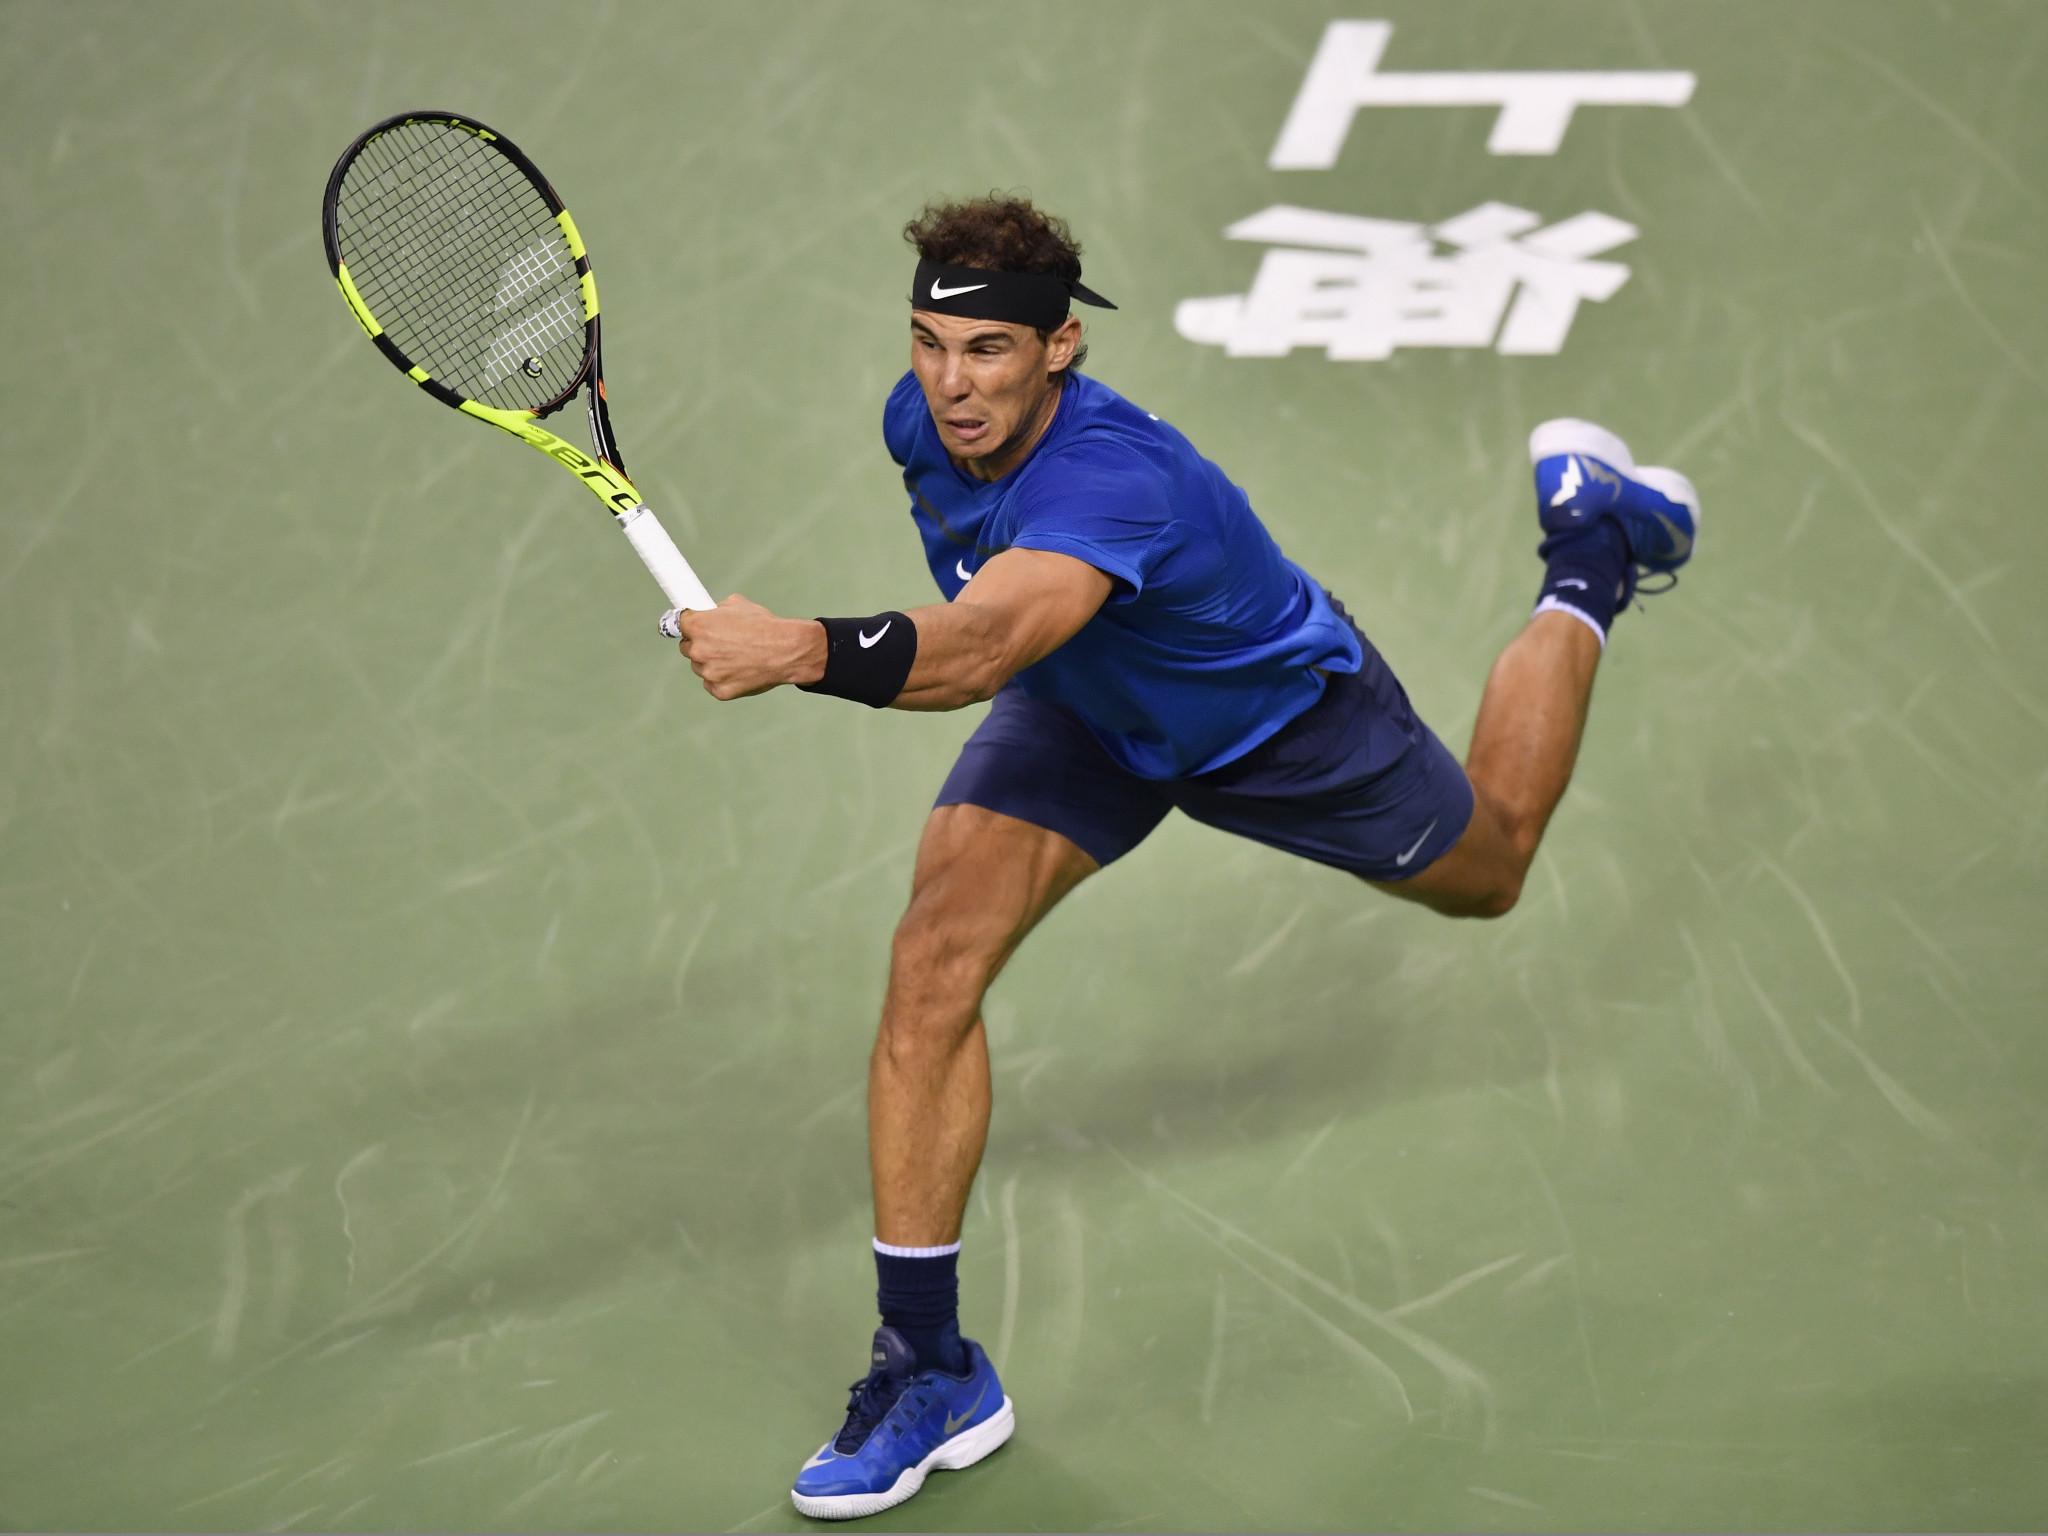 World number one Rafael Nadal and Swiss star Roger Federer both progressed to the third round of the Shanghai Masters ©Getty Images